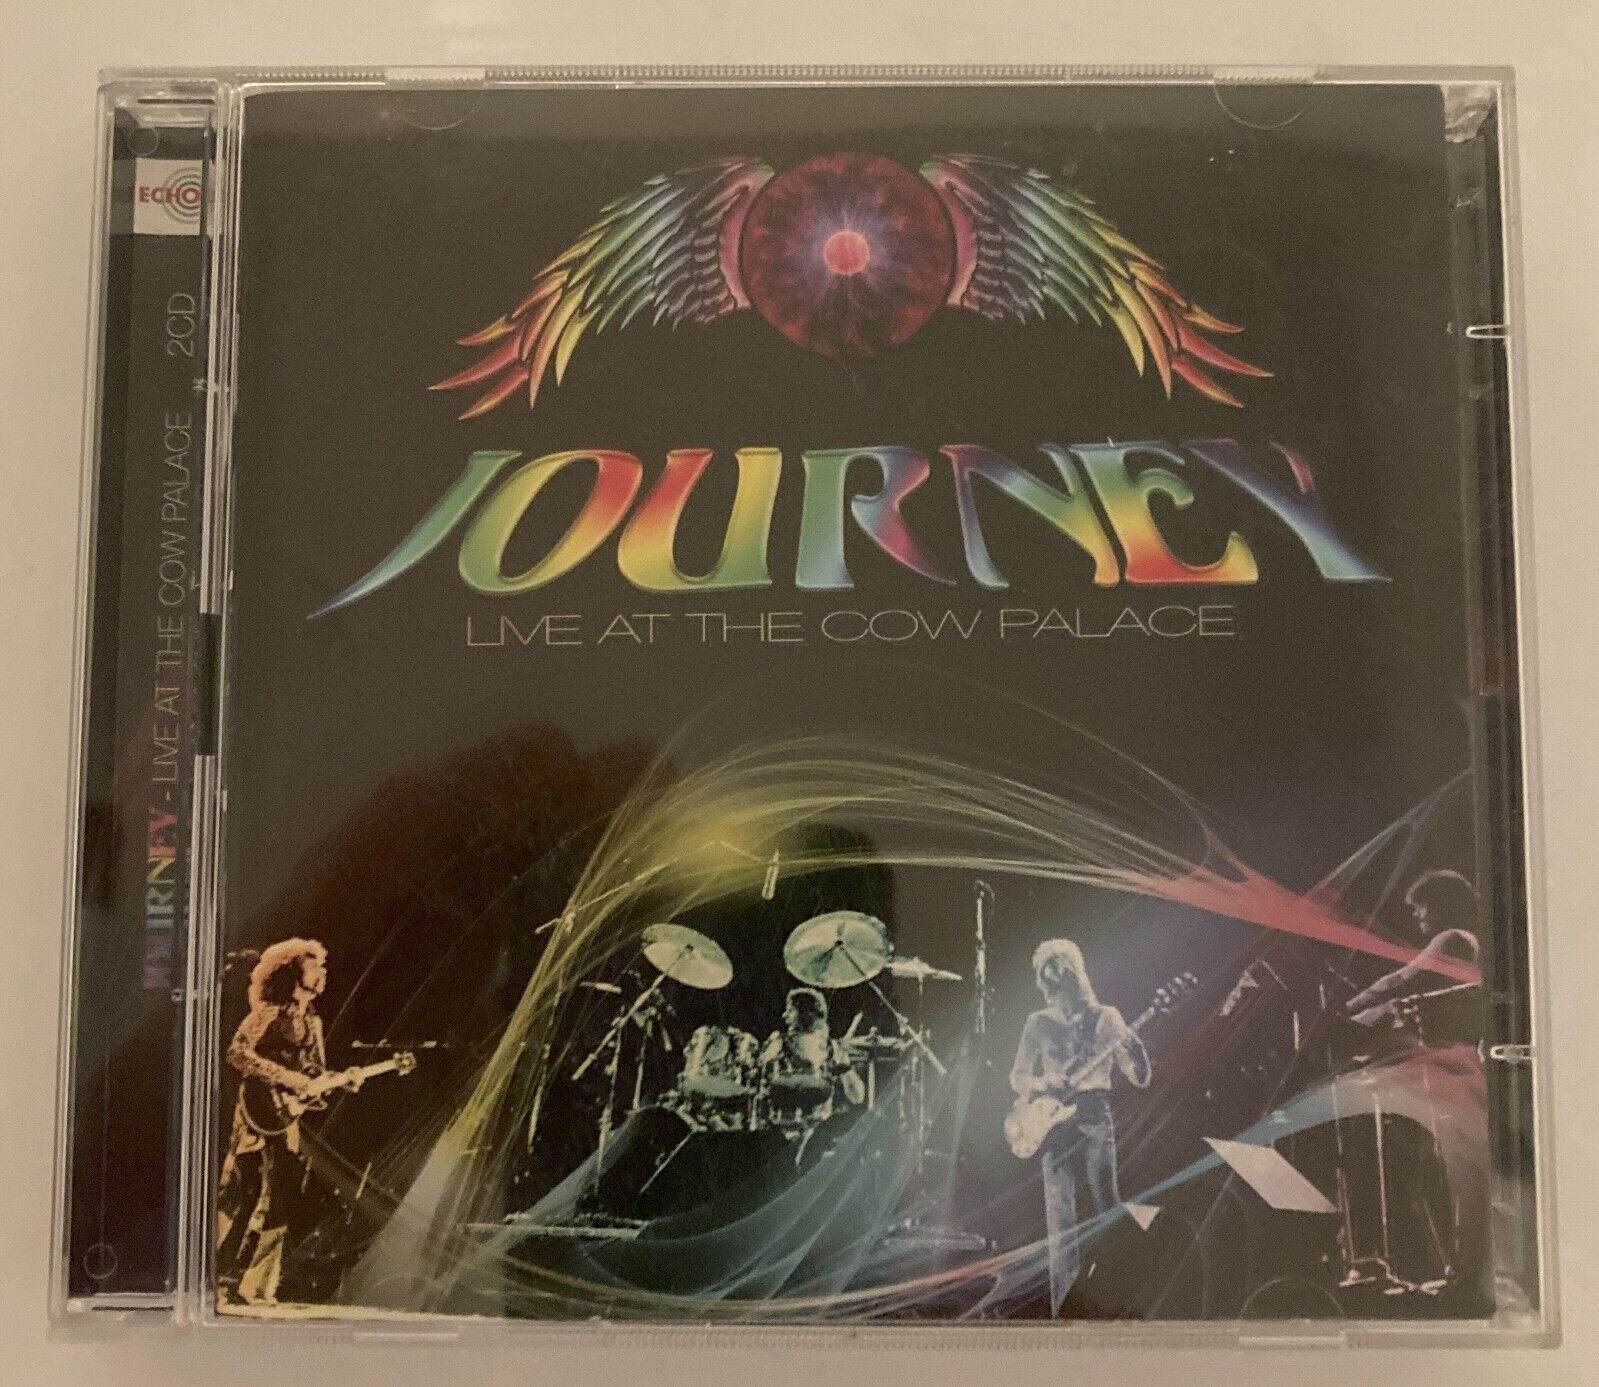 JOURNEY-Live at The Cow Palace 2 CD SET----RARE---EXCELLENT CONDITION